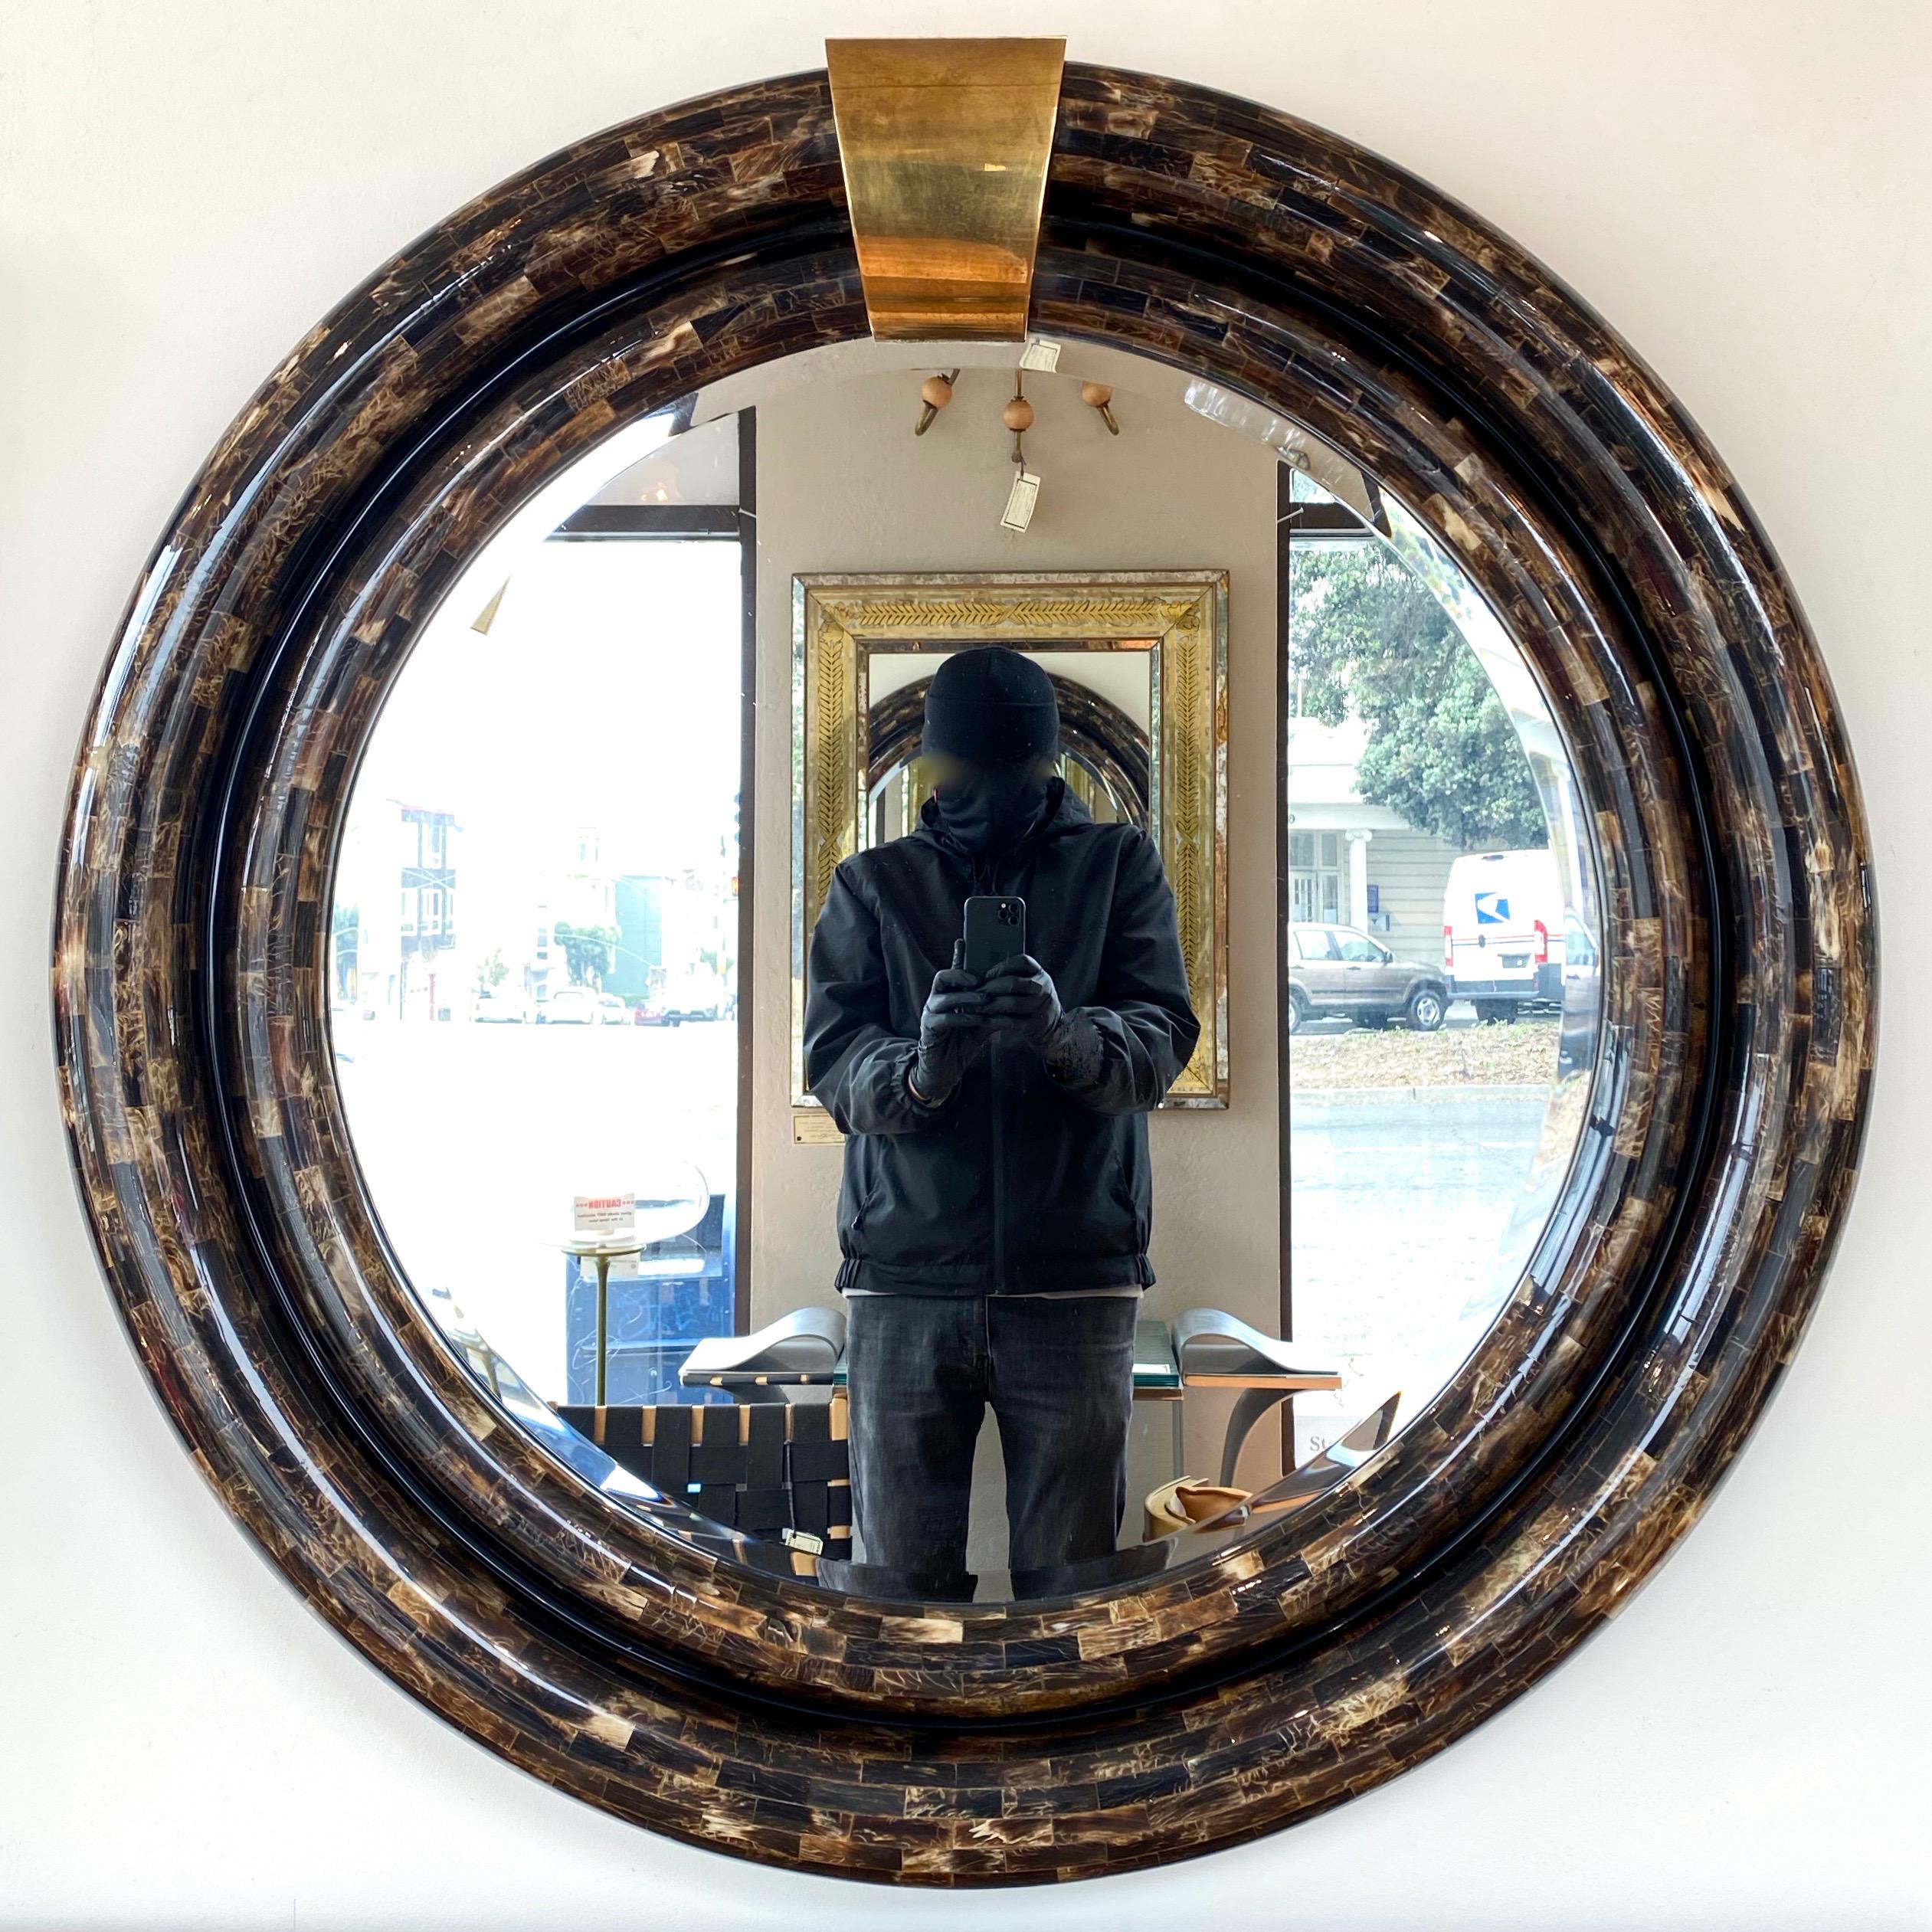 An absolutely stunning and likely bespoke 1970s tessellated horn and brass mirror by Ambience, done in the manner of Enrique Garcel or Karl Springer.

Large circular frame of two rounded, stepped rings covered in countless meticulously cut and